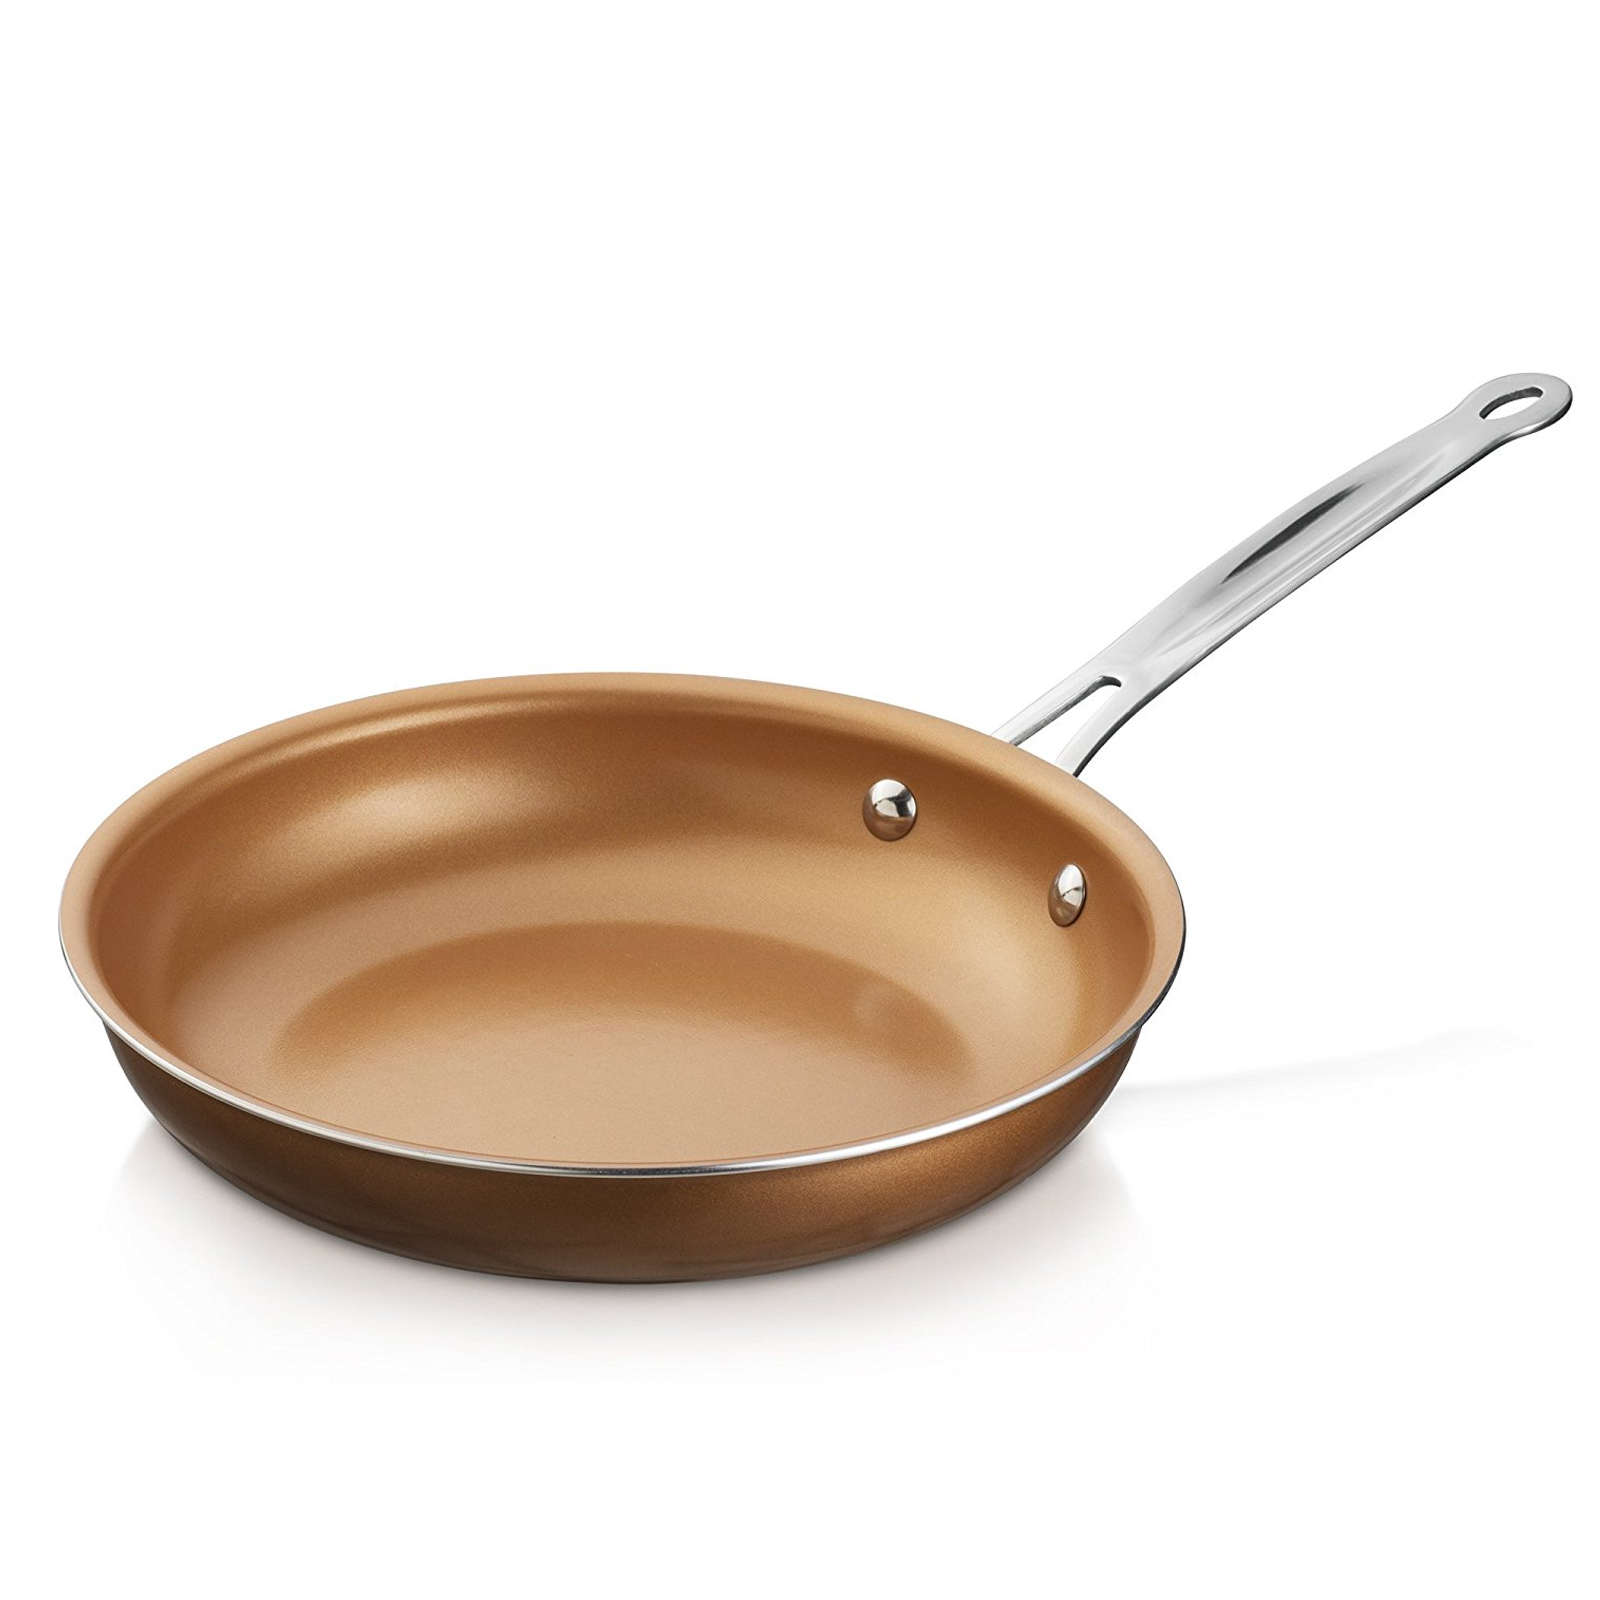 Brentwood 11.5" Induction Copper Frying Pan Set with Non-Stick, Ceramic Coating